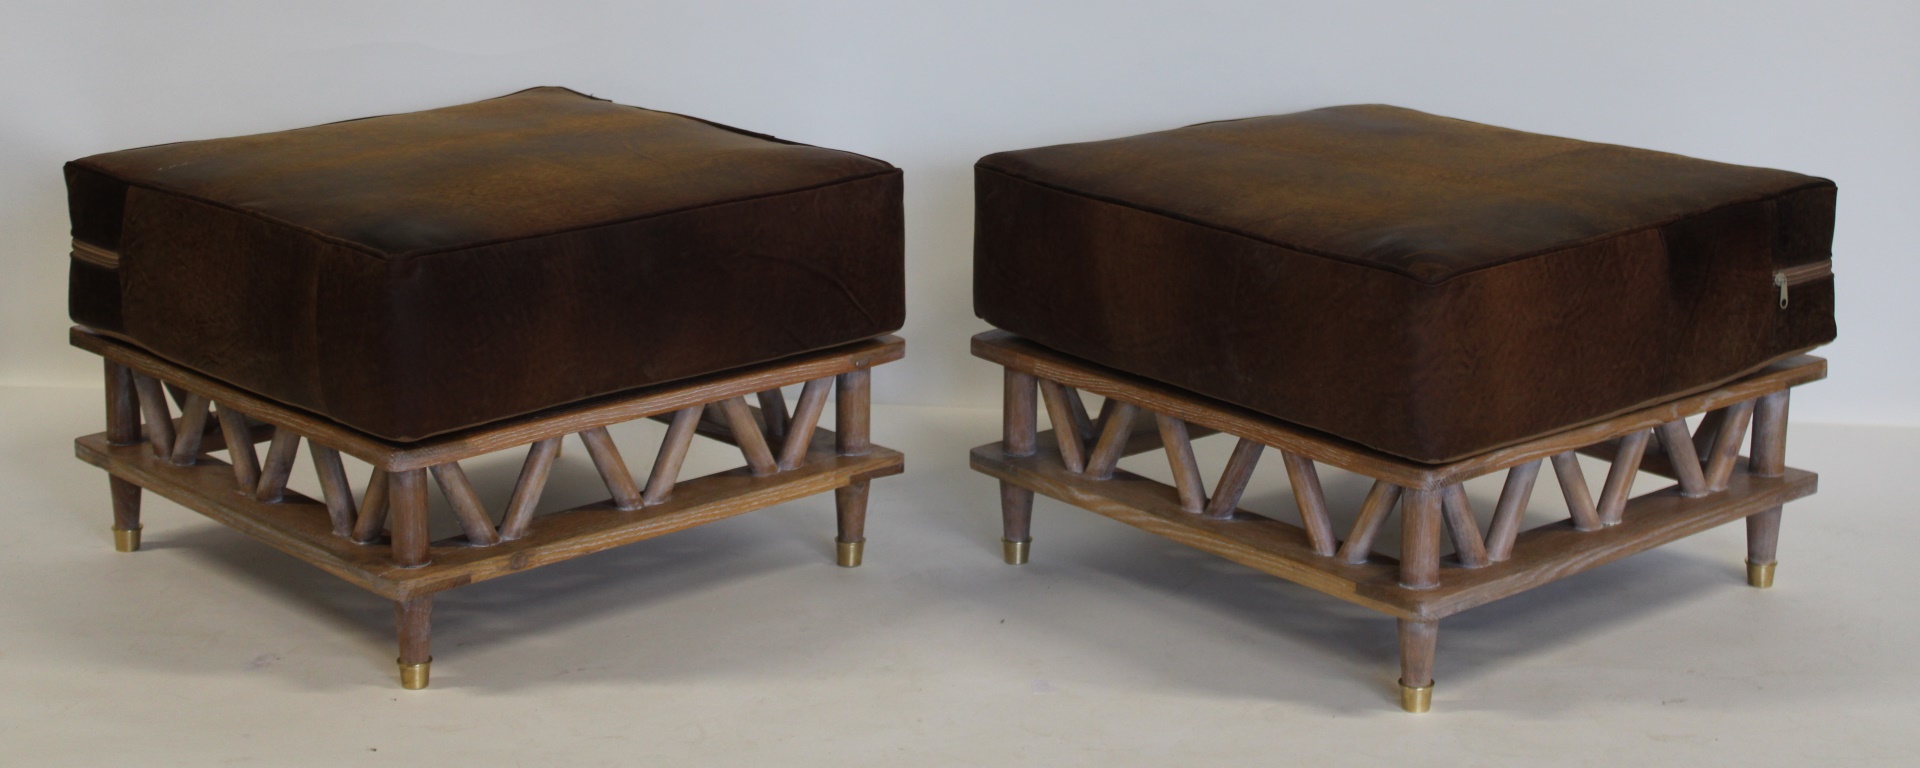 A PR OF BLONDE WOOD OTTOMANS WITH 3ba129